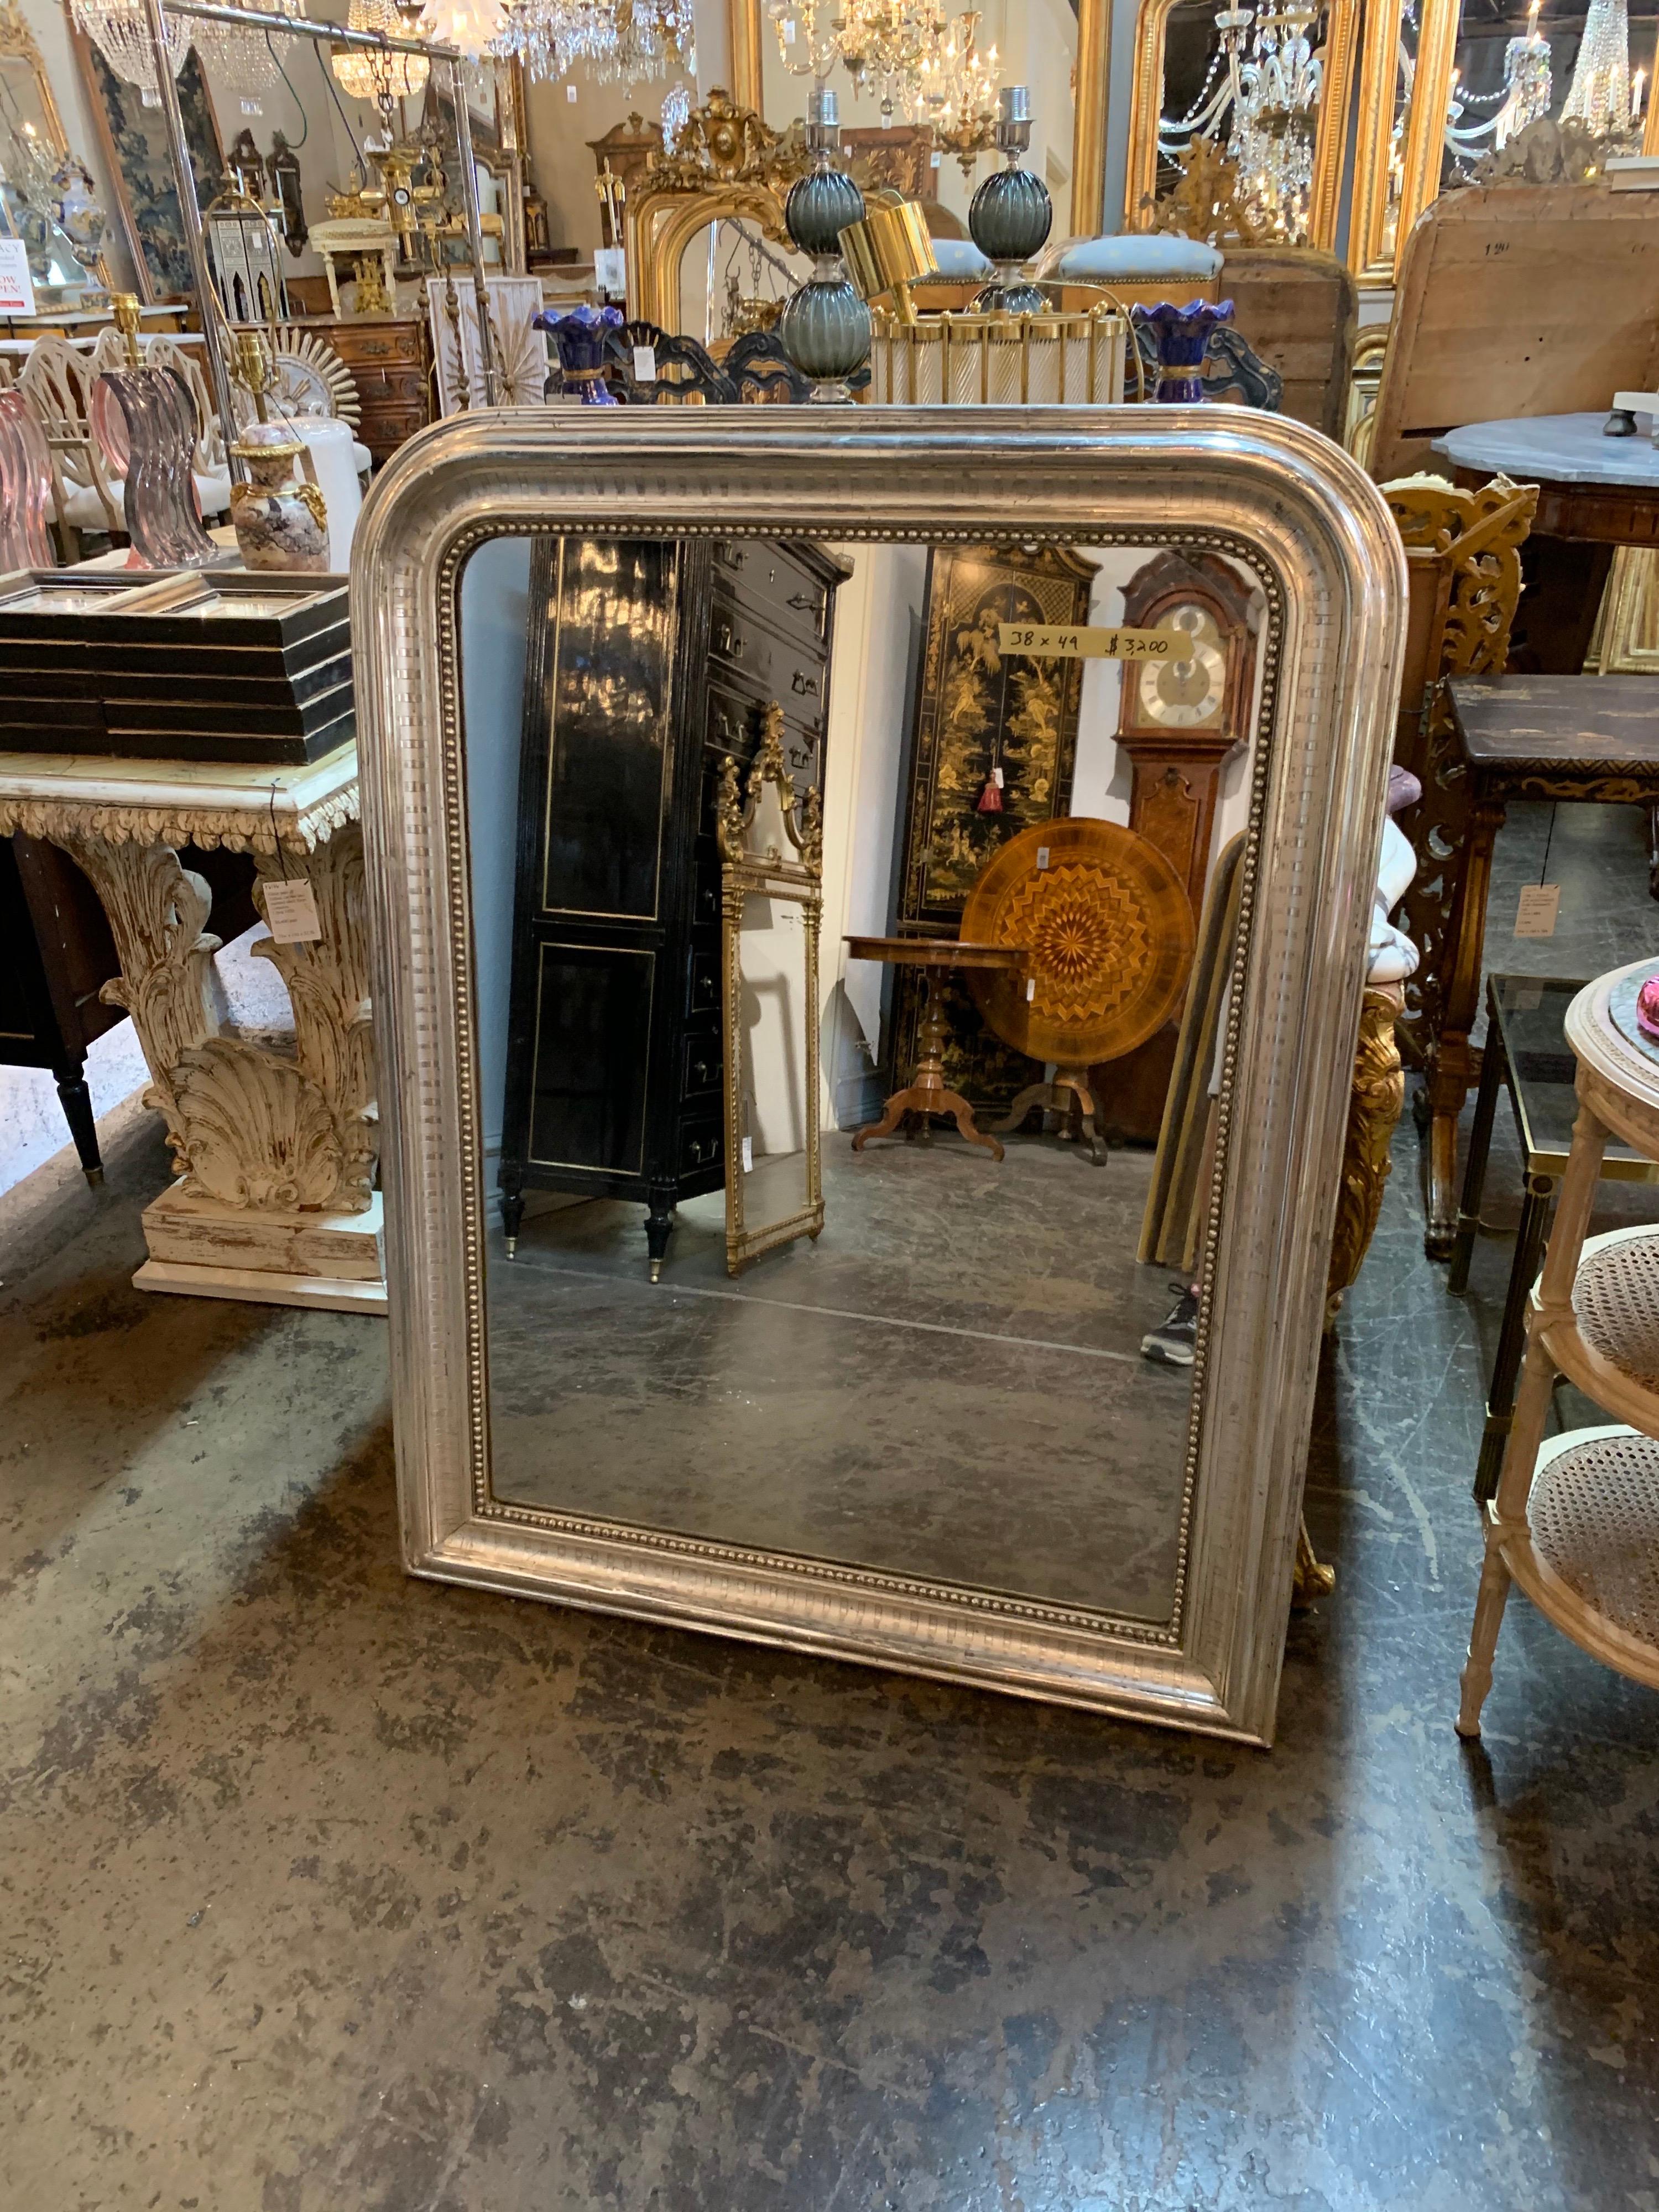 Fabulous 19th century French silver Louis Philippe mirror with bar pattern and beaded inner border. So pretty and mixes well with a variety of decors!